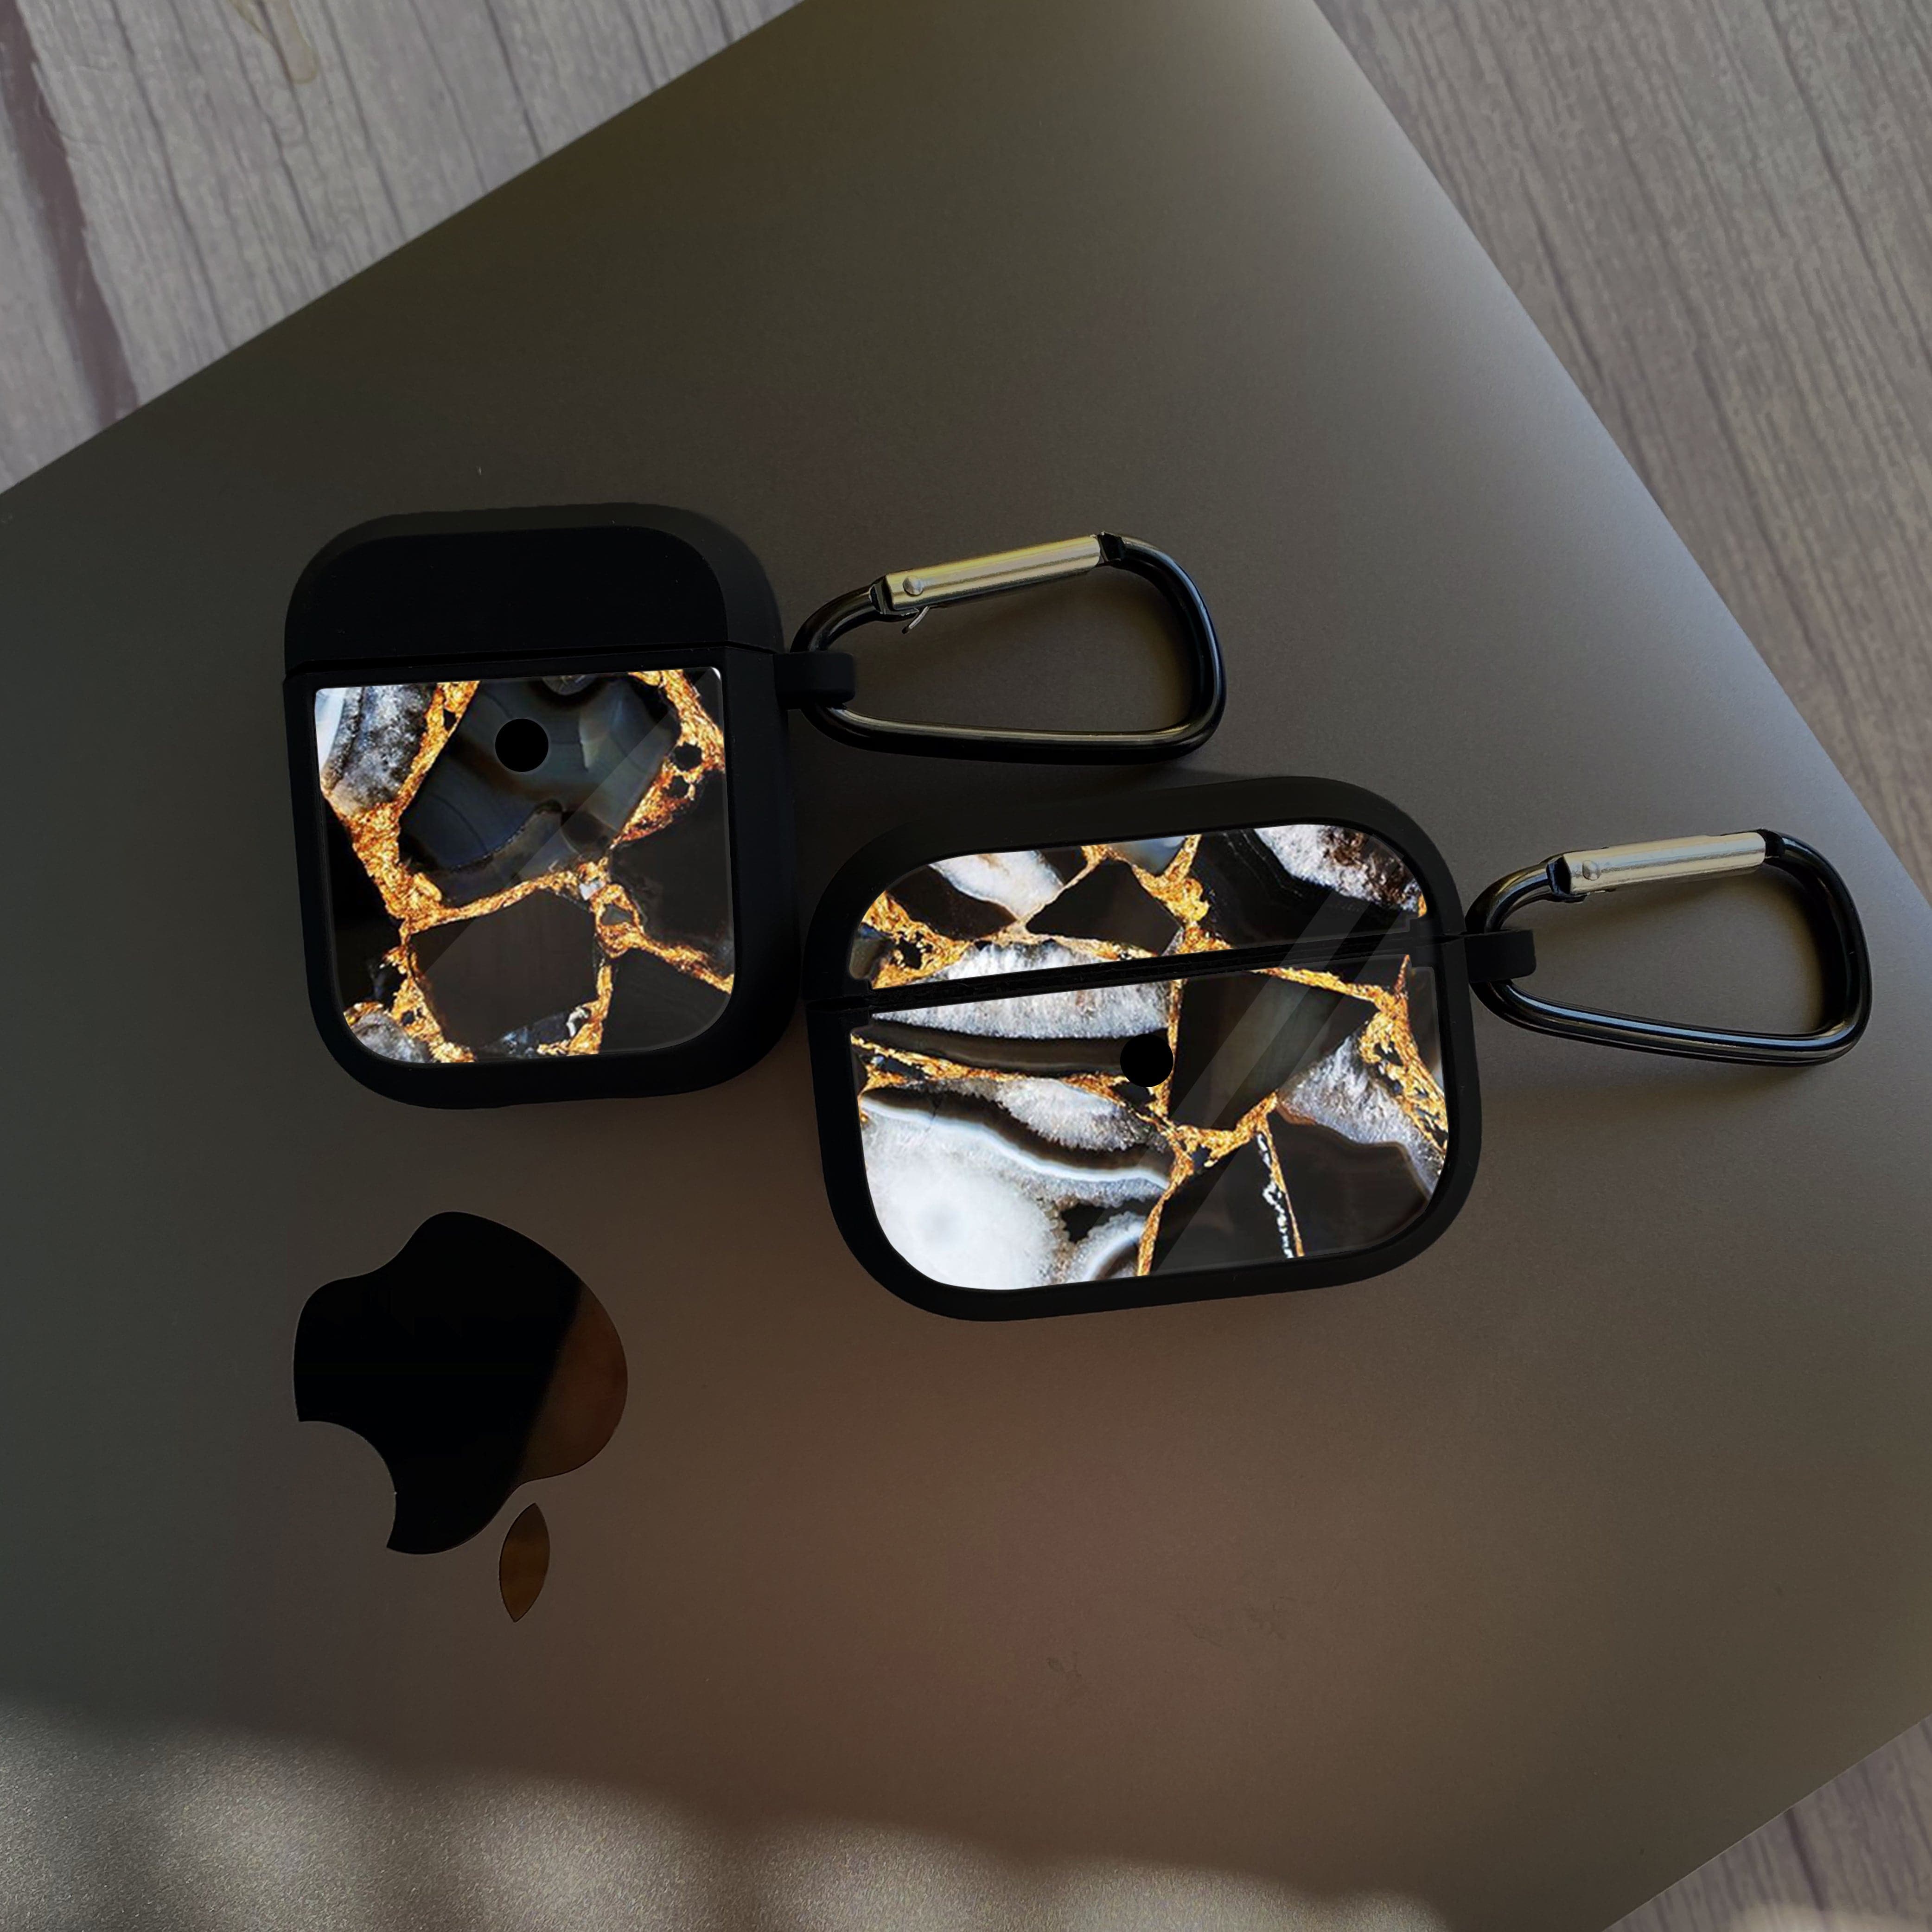 Apple Airpods Case - Black Marble Series 05 - Premium Print with holding clip